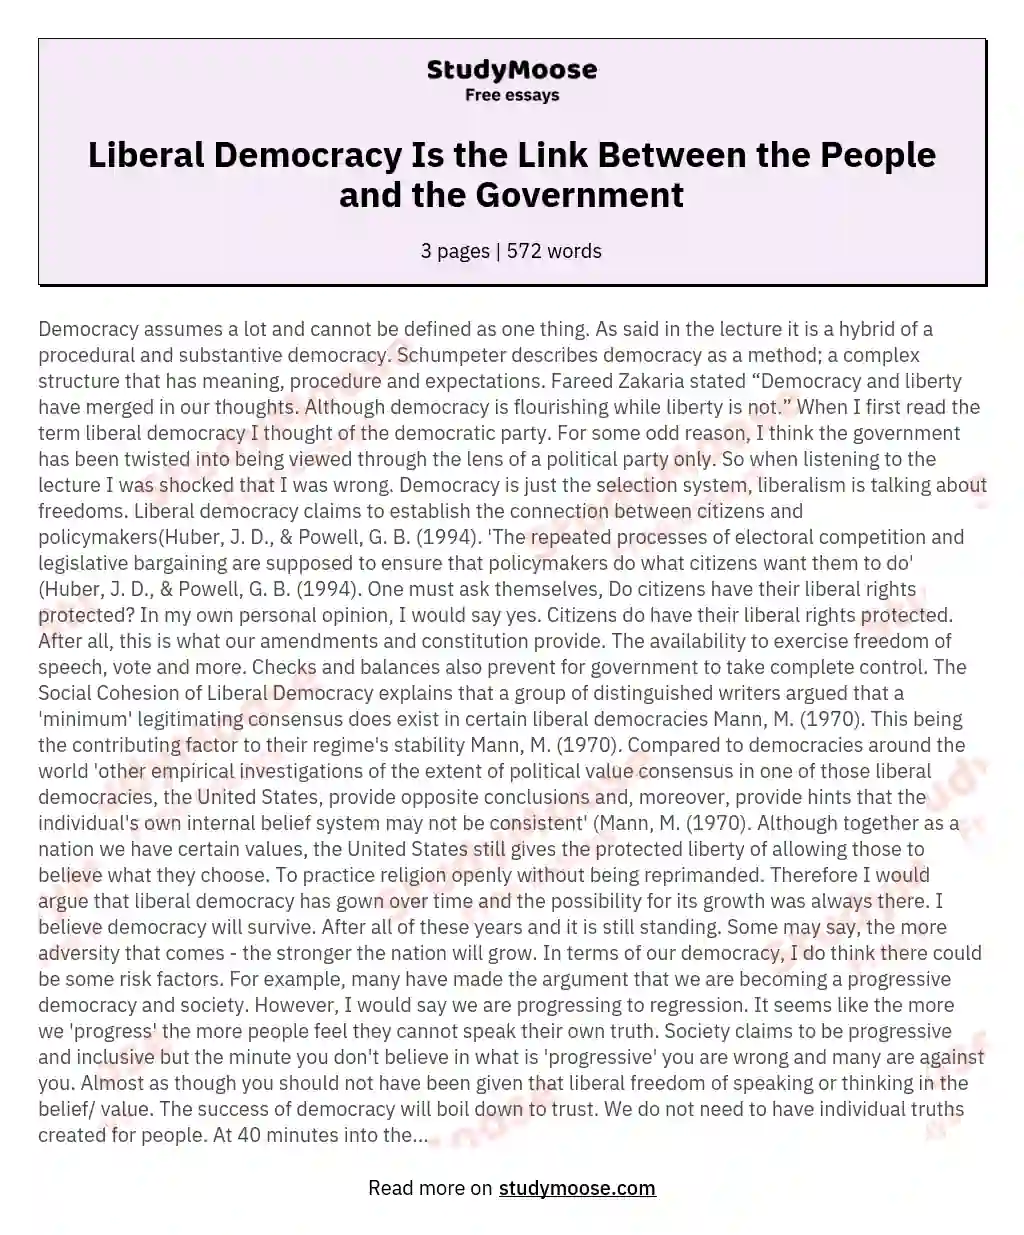 Liberal Democracy Is the Link Between the People and the Government essay